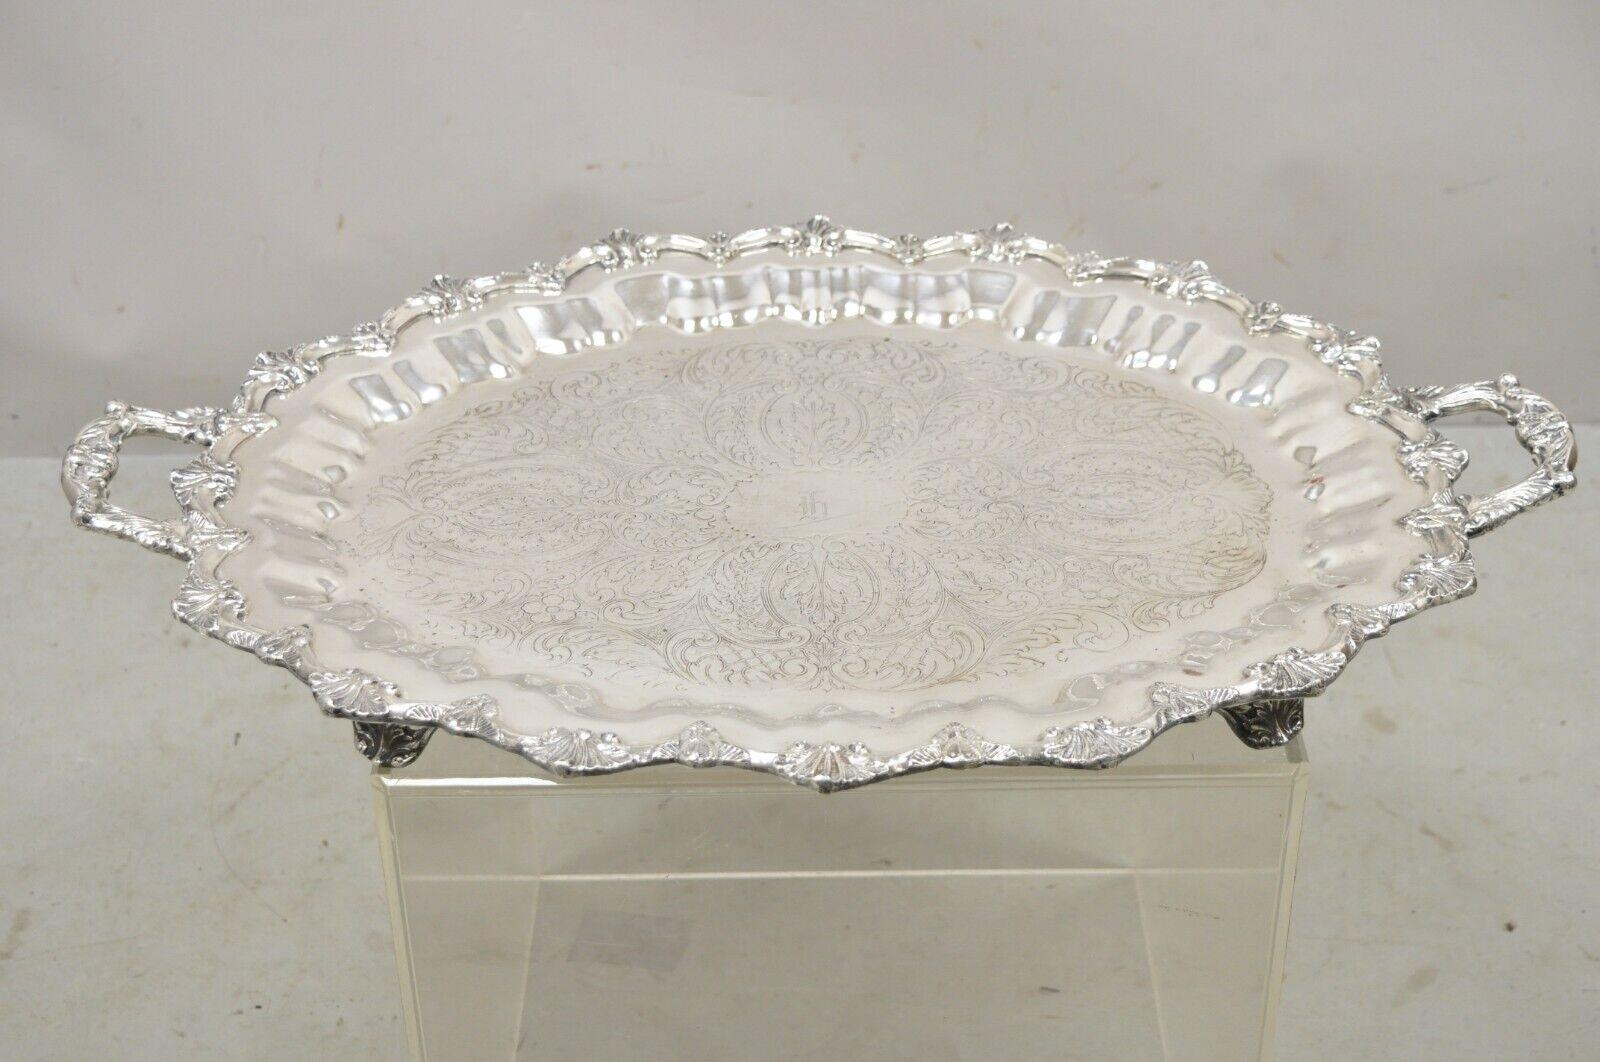 Prospect Silver Co Silver Plated Victorian Style Twin Handle Serving Platter. Item raised on ornate feet, fancy twin handles, floral etched center, original hallmark, very nice vintage item, great style and form. circa early to mid 20th century.